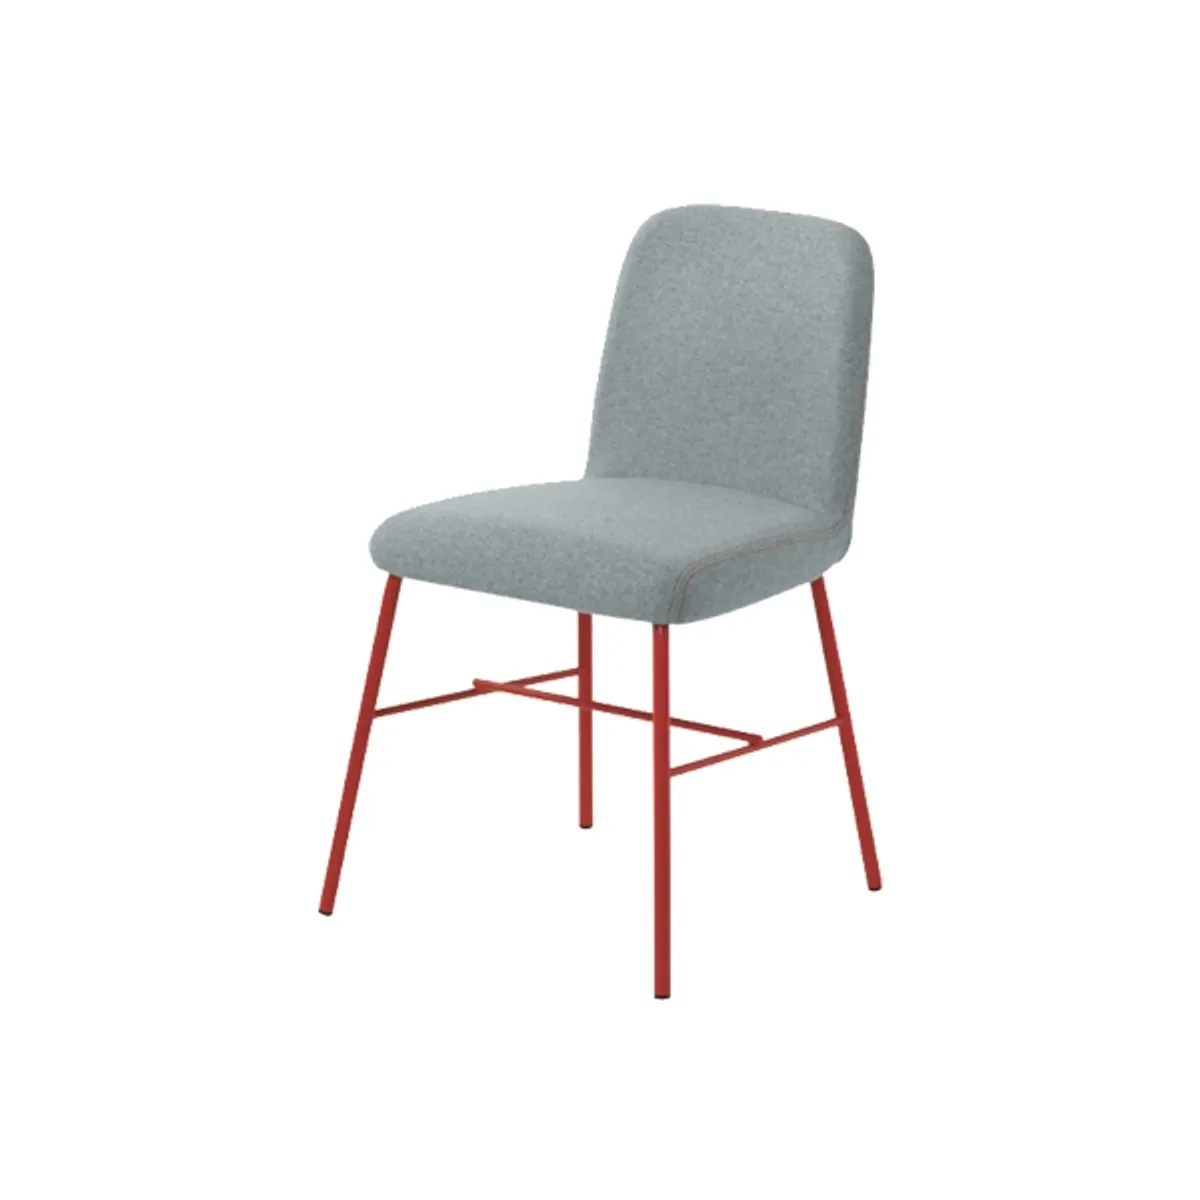 Myrametalside chair Inside Out Contracts